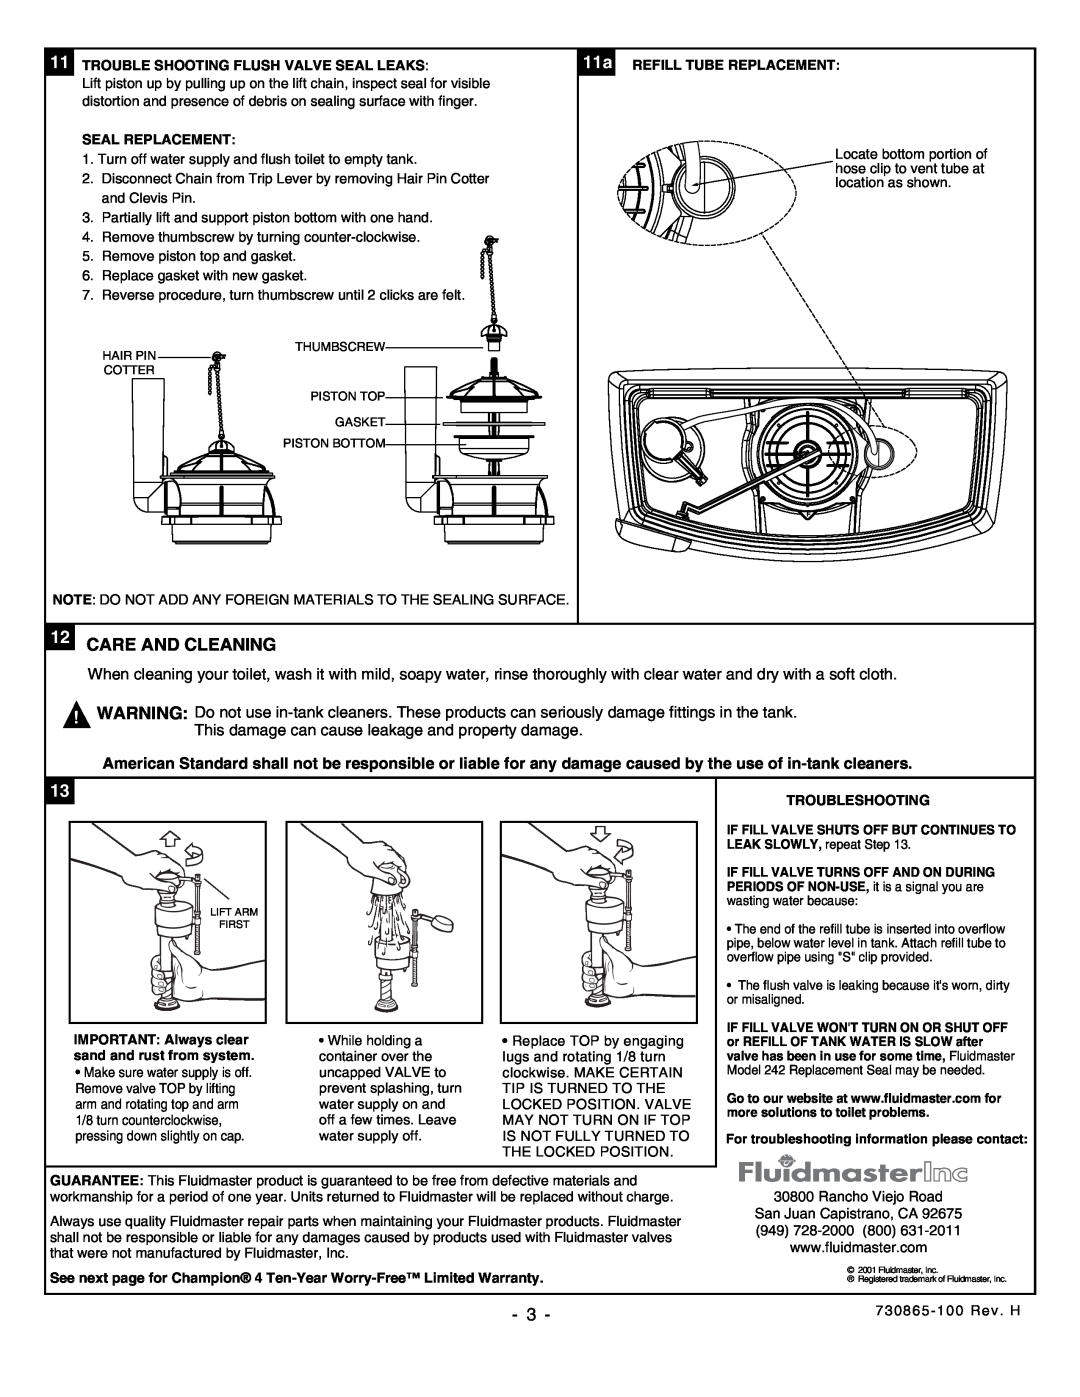 American Standard 2003 12CARE AND CLEANING, 11TROUBLE SHOOTING FLUSH VALVE SEAL LEAKS, Seal Replacement, Troubleshooting 